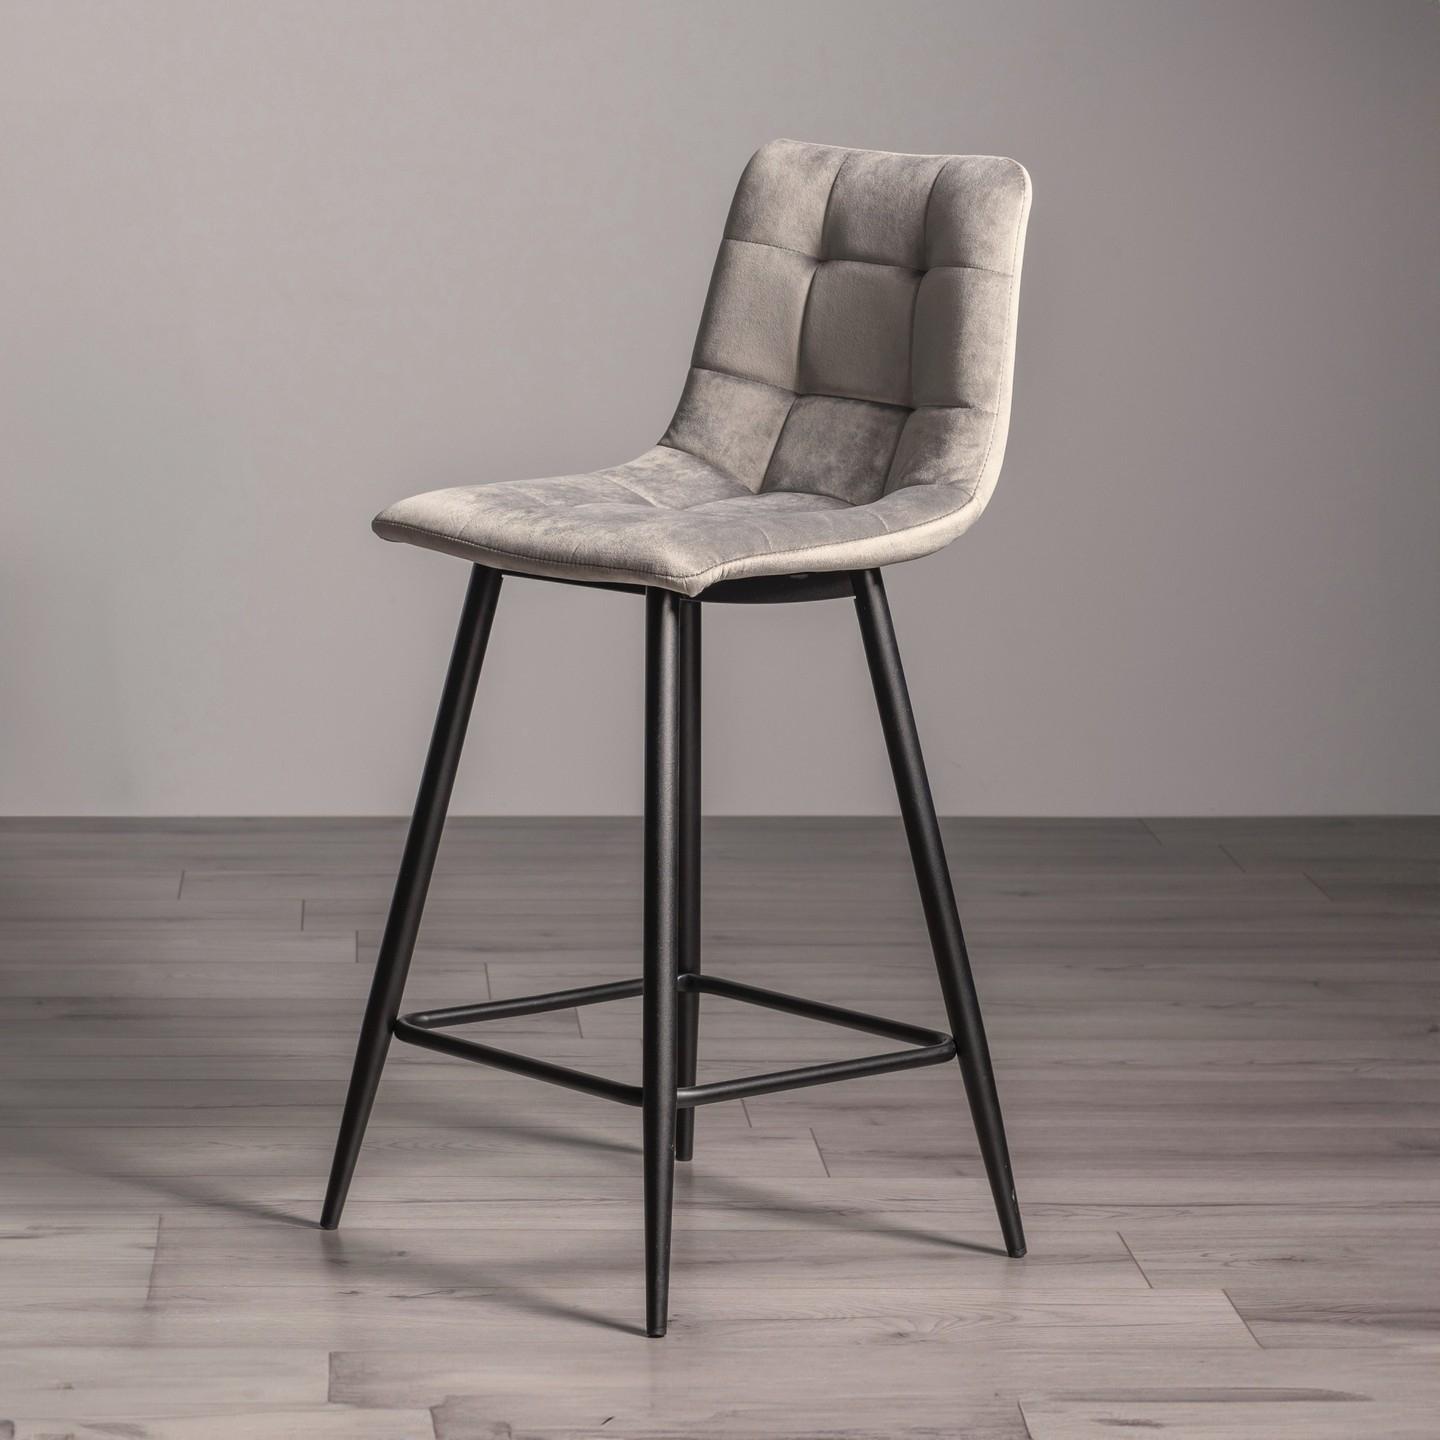 With squared stitched upholstery, an elegant tapered back, and round tapering metal legs, the Mondria...